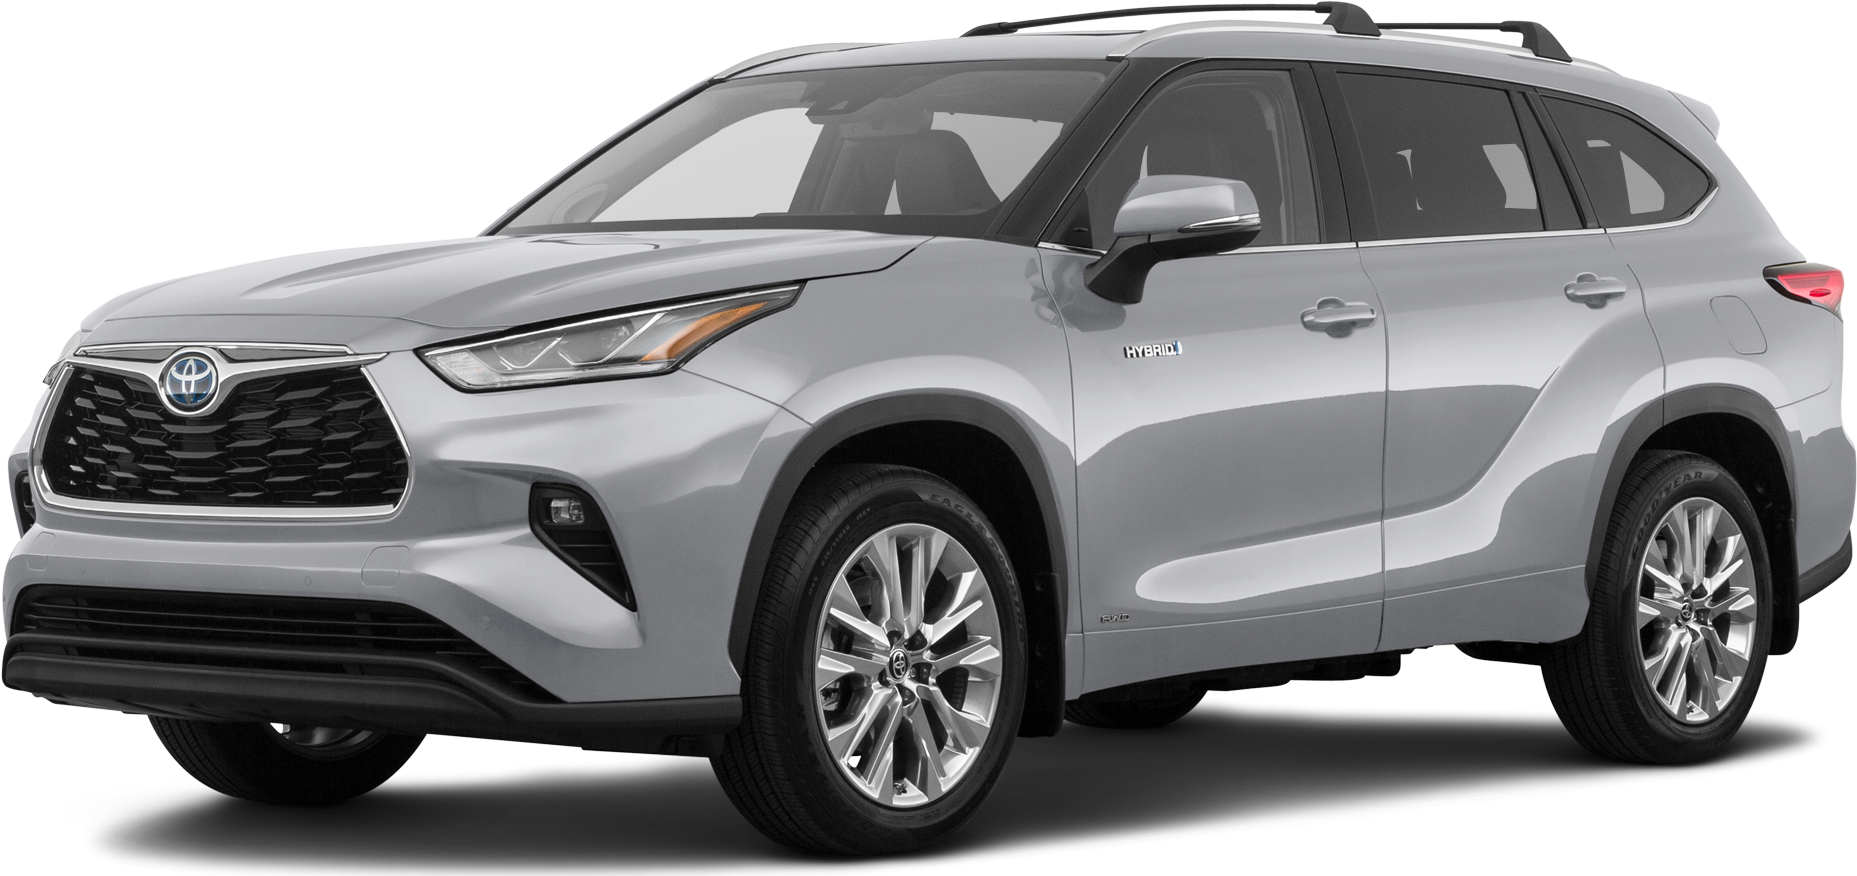 2020 Toyota Highlander Hybrid Price Value Ratings And Reviews Kelley